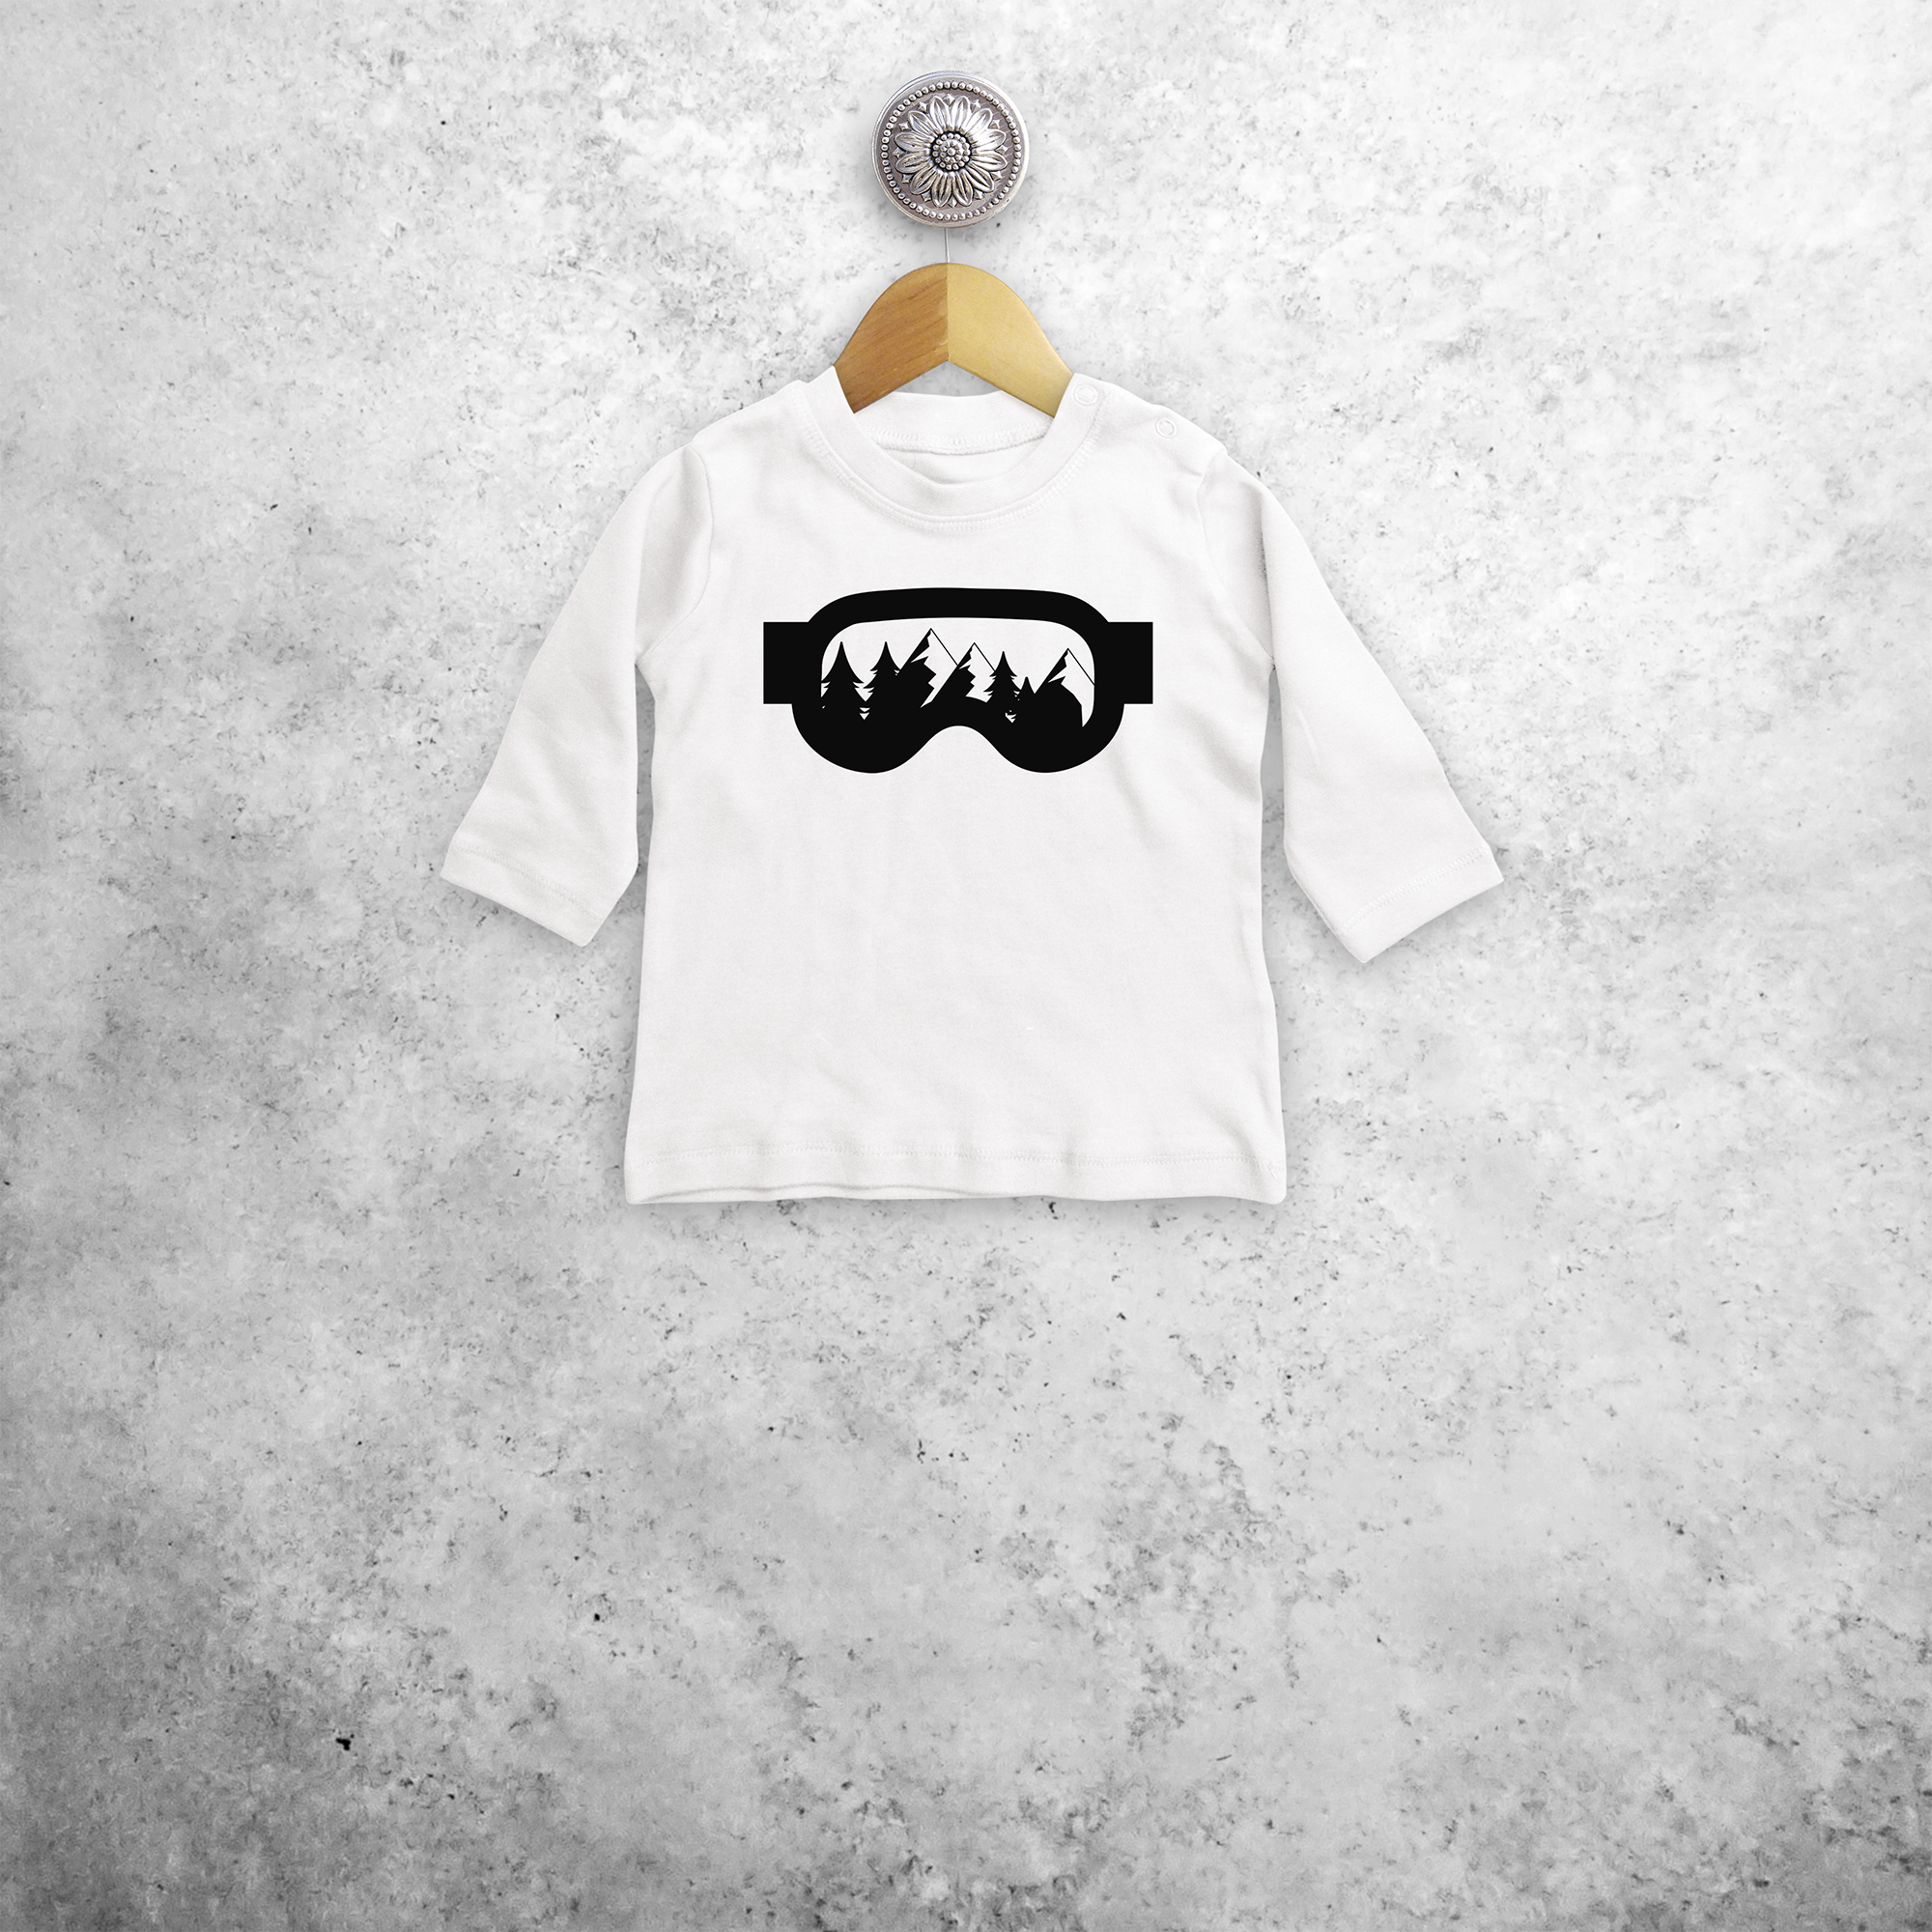 Baby or toddler shirt with long sleeves, with ski goggles print by KMLeon.